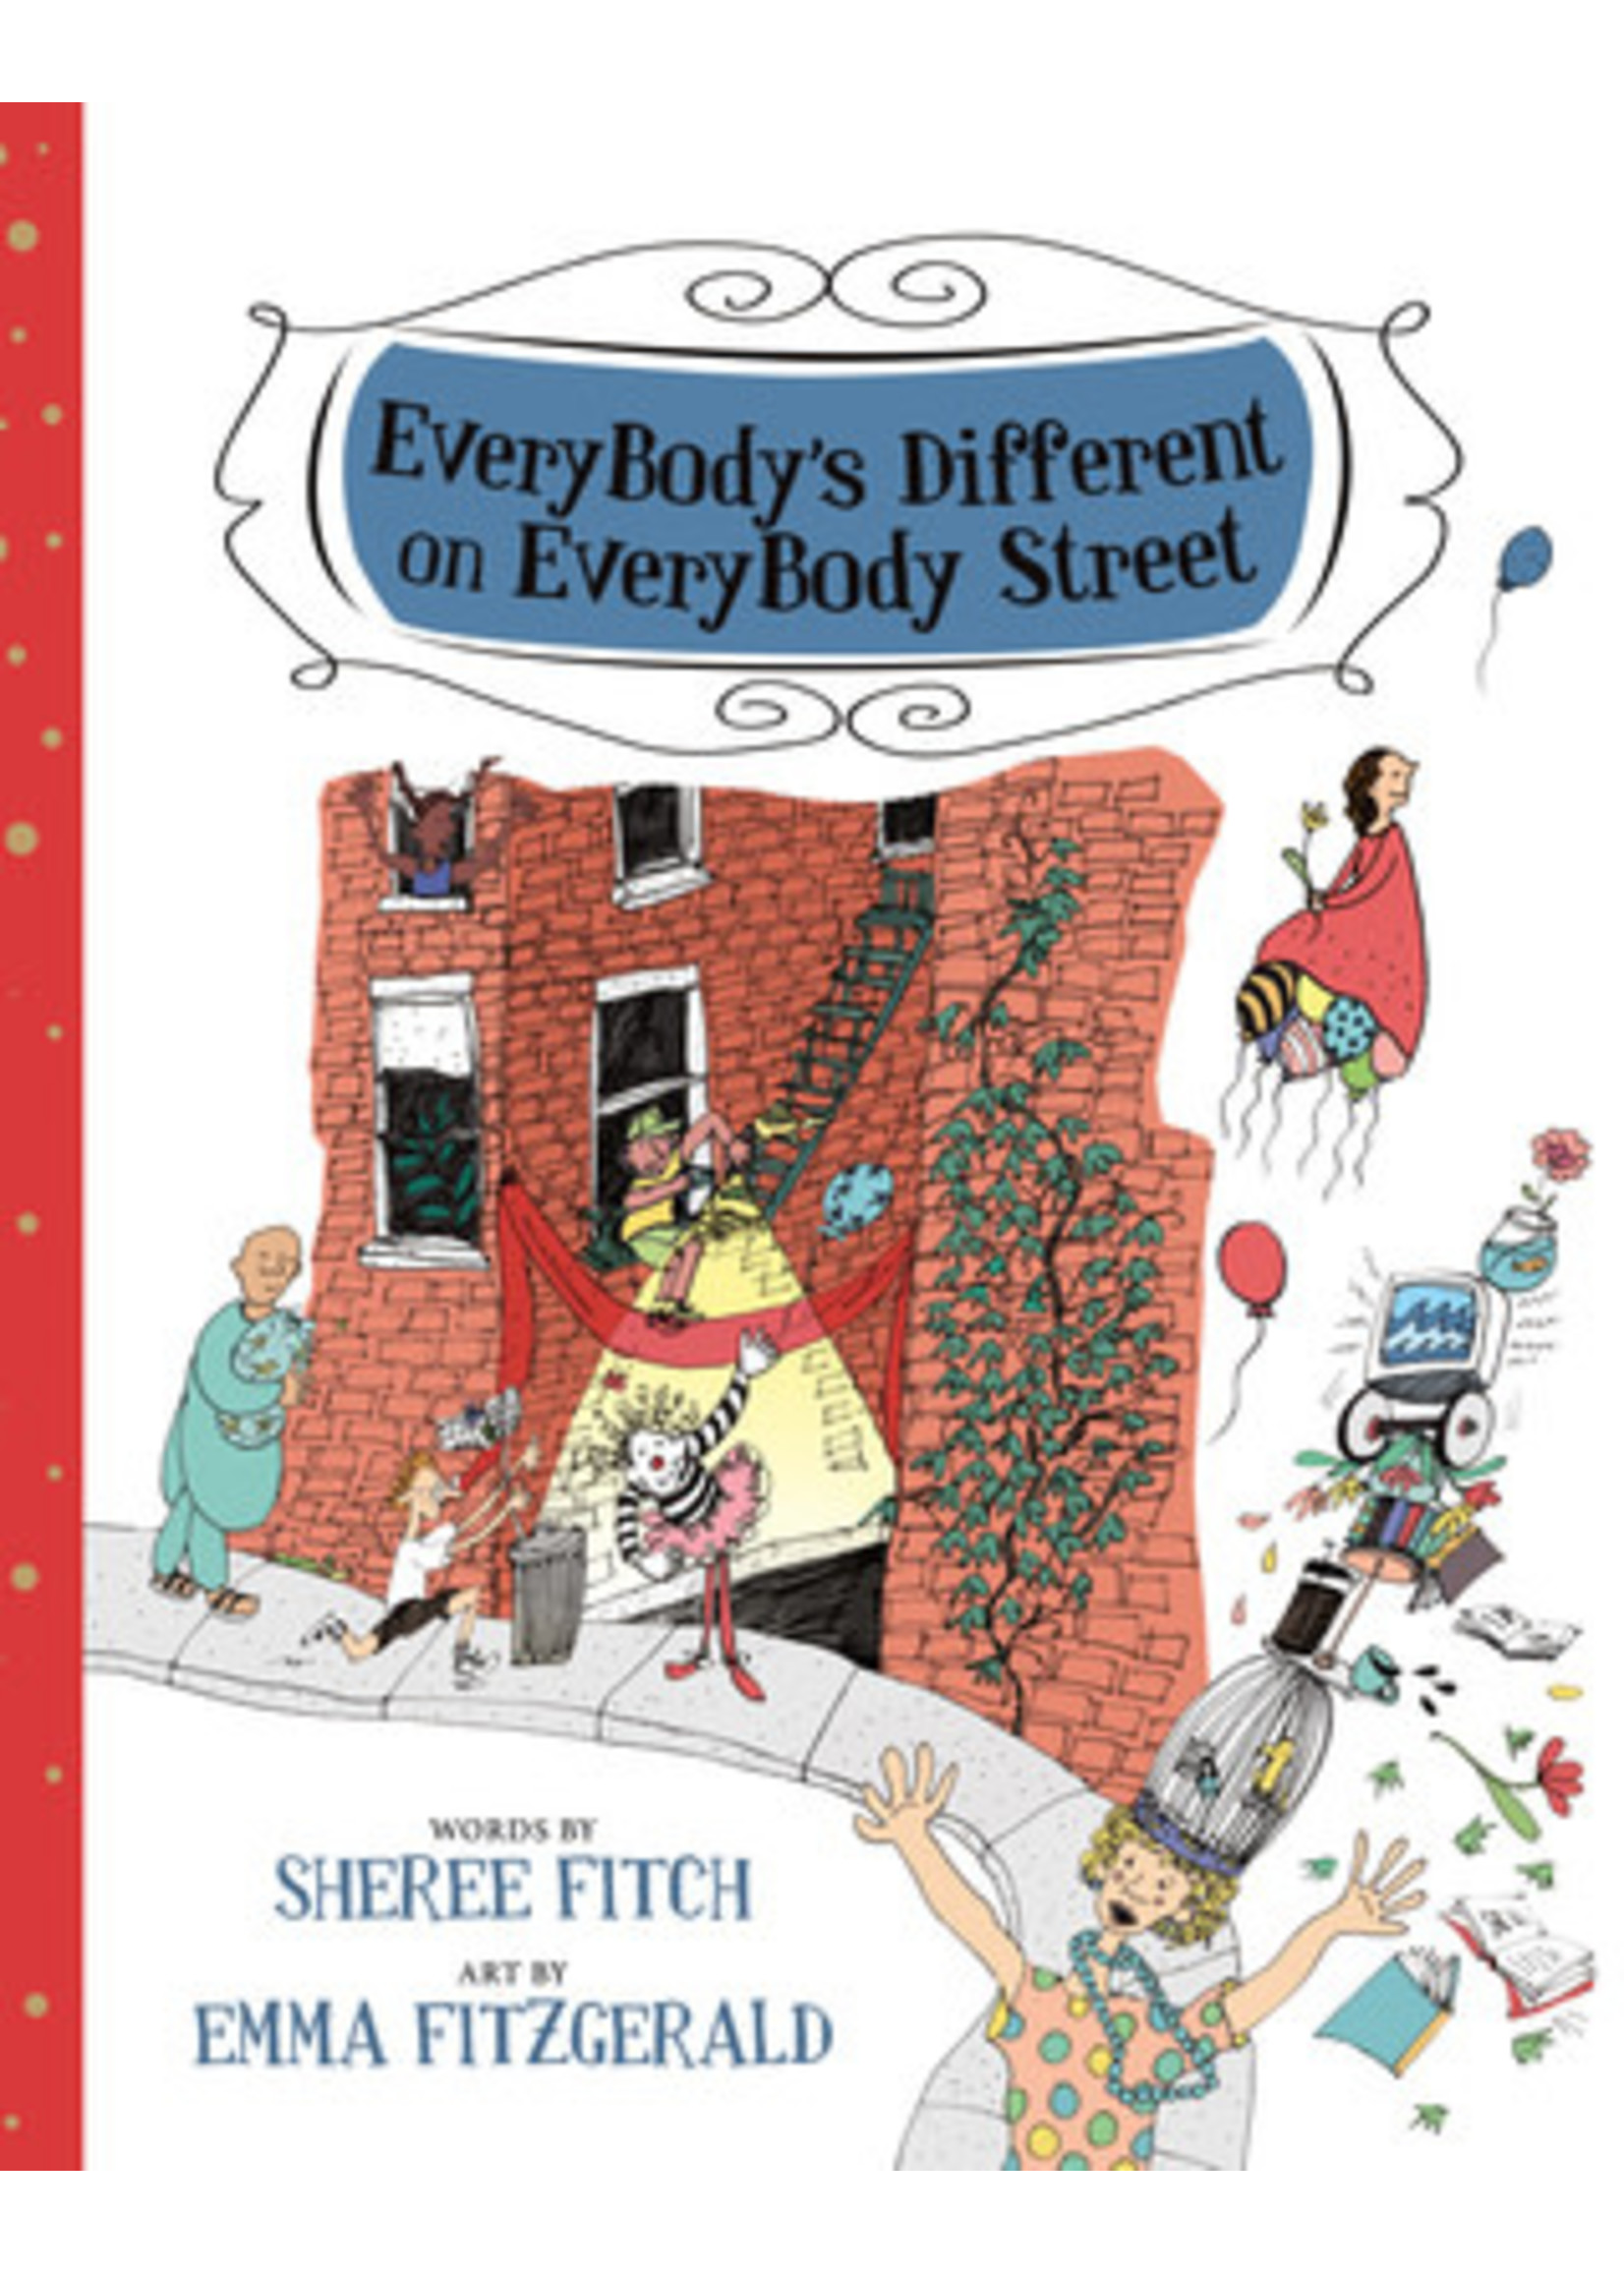 EveryBody's Different on EveryBody Street by Sheree Fitch,  Emma FitzGerald